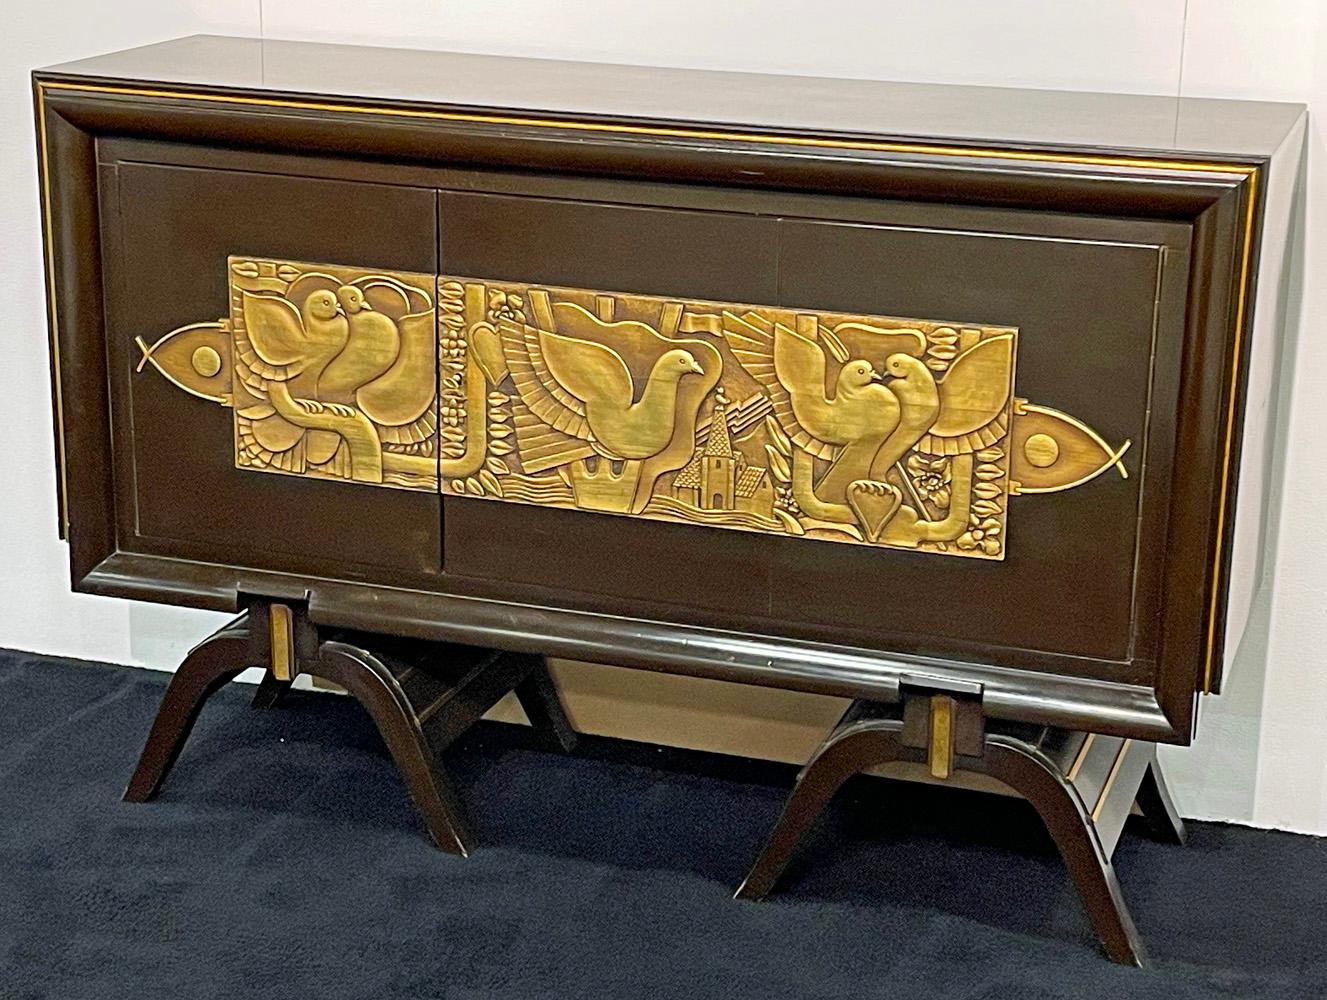 Beautifully designed and constructed, this Art Deco console table features a bold and sophisticated lacquered relief panel at its center, featuring stylized doves and foliate motifs flanking a landscape scene with a dove cote in the distance. The